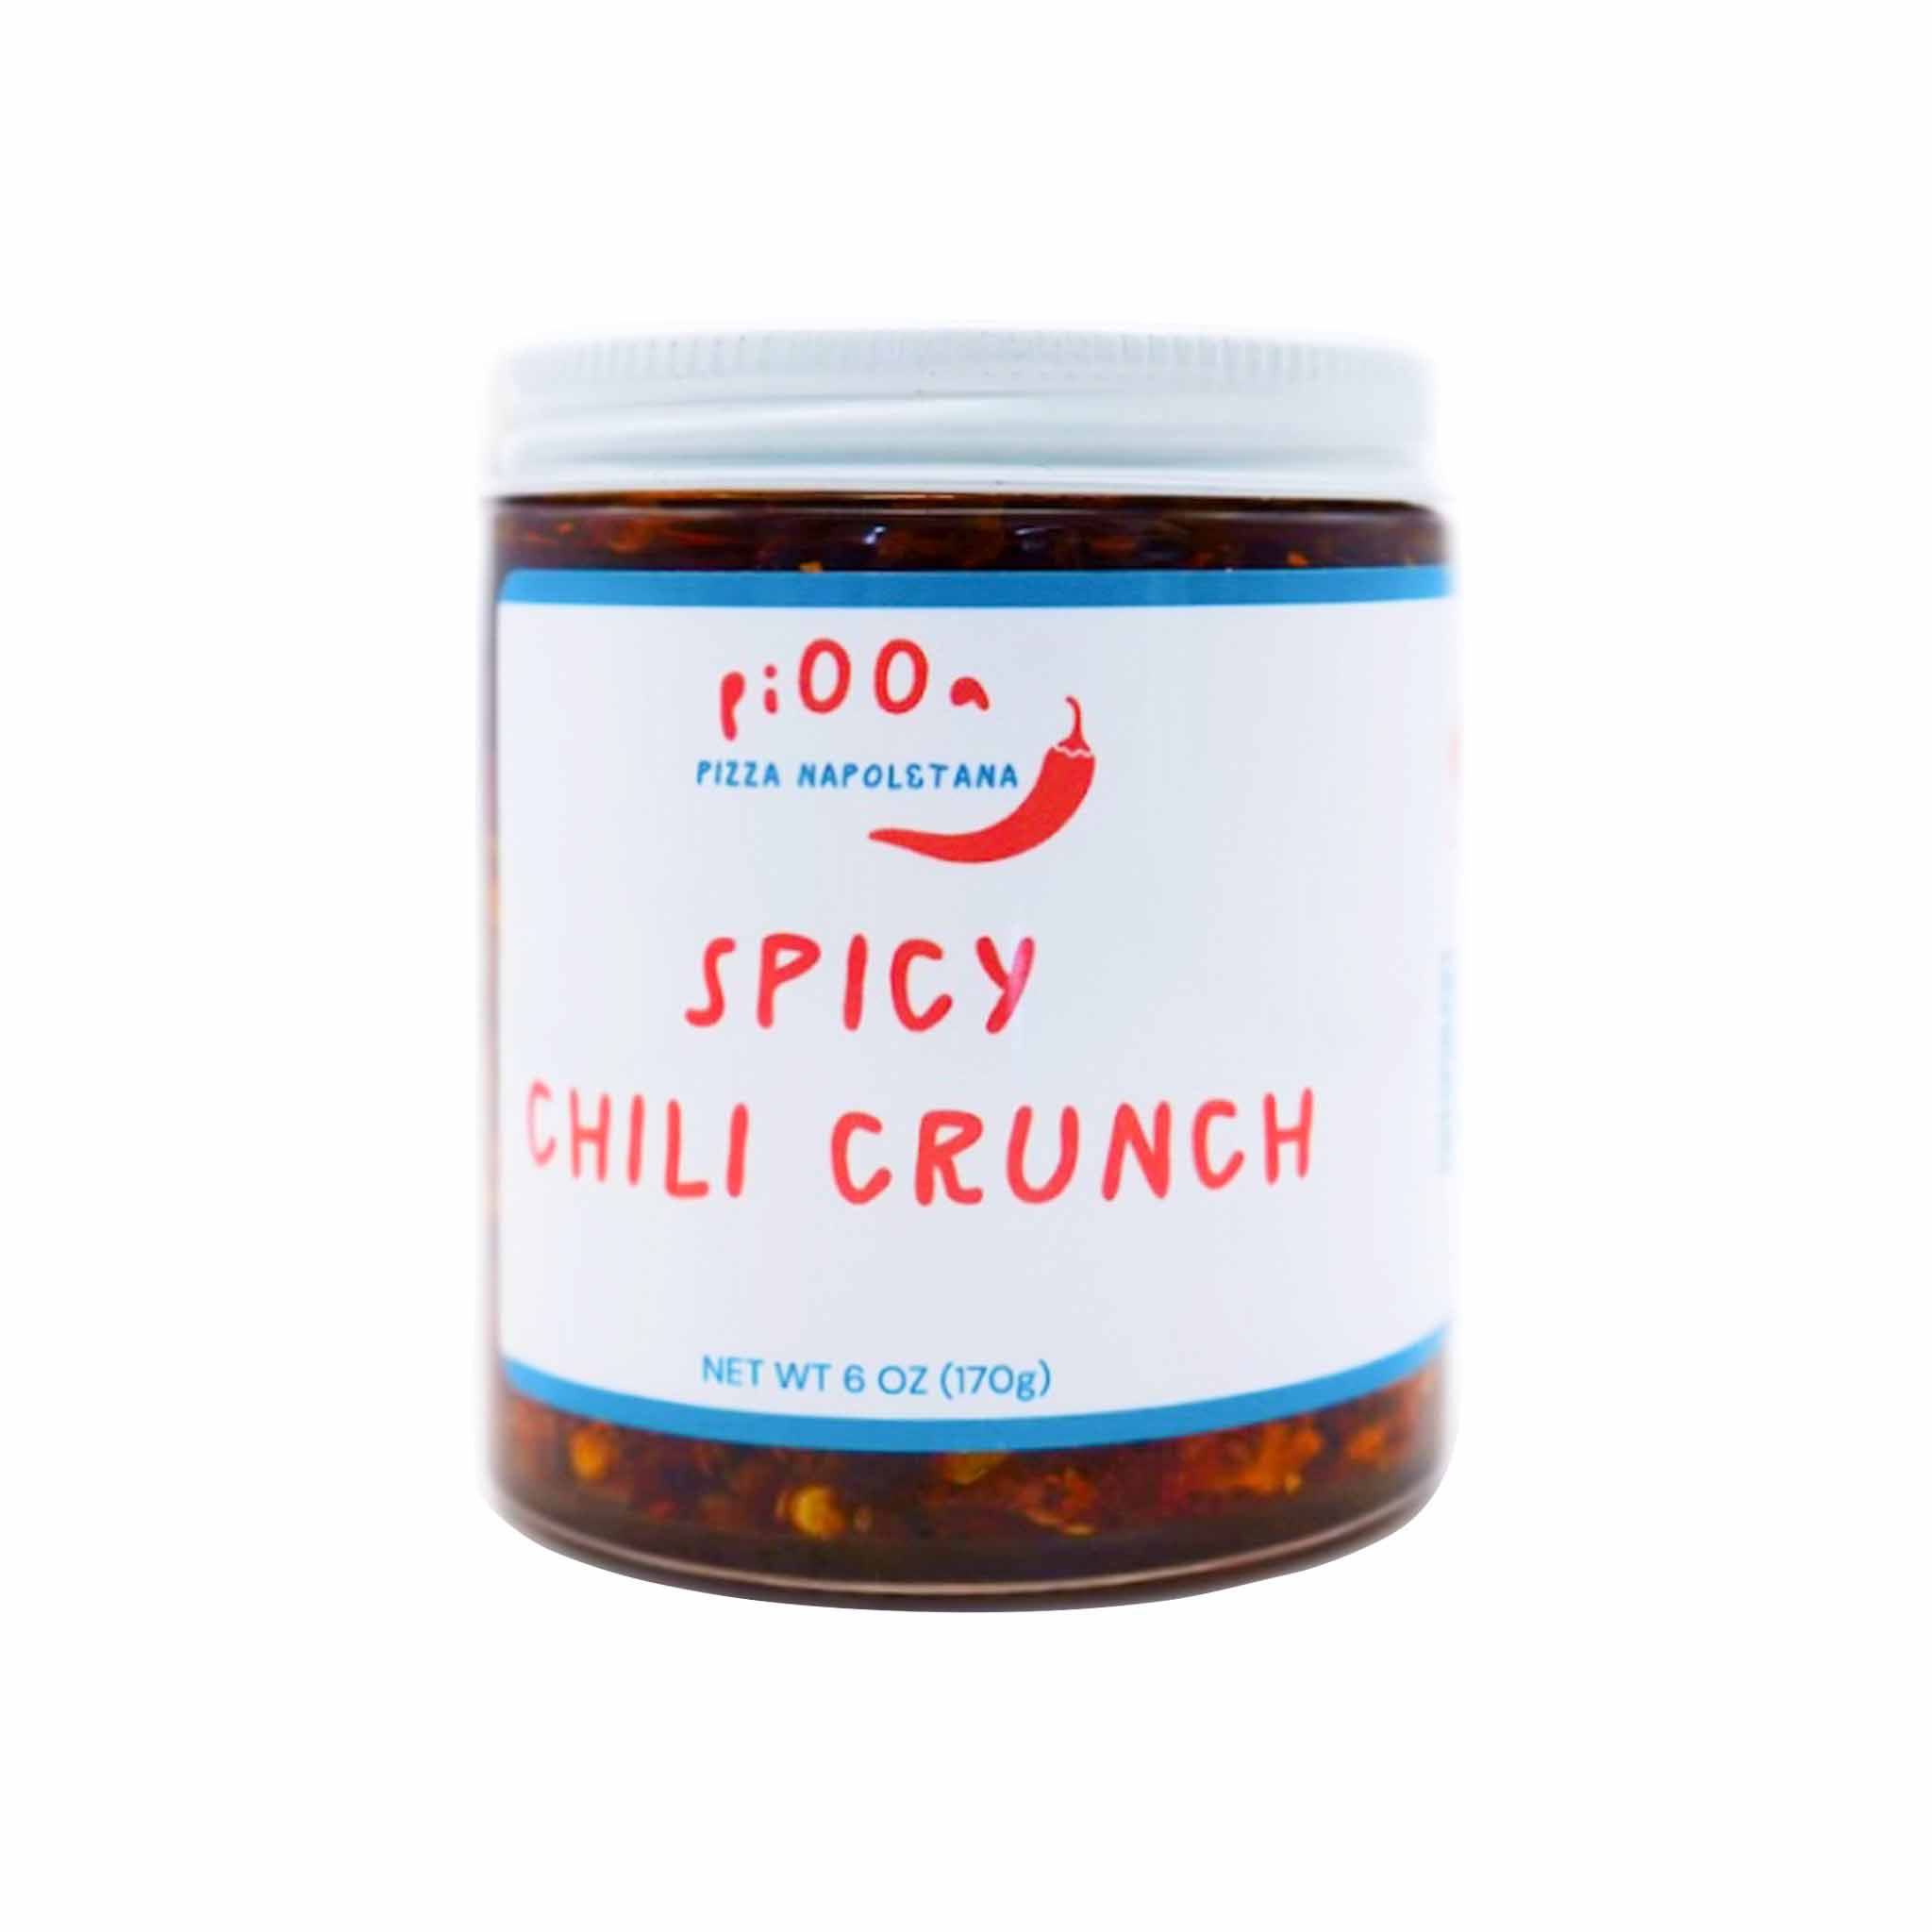 Piooa Spicy Chili Crunch